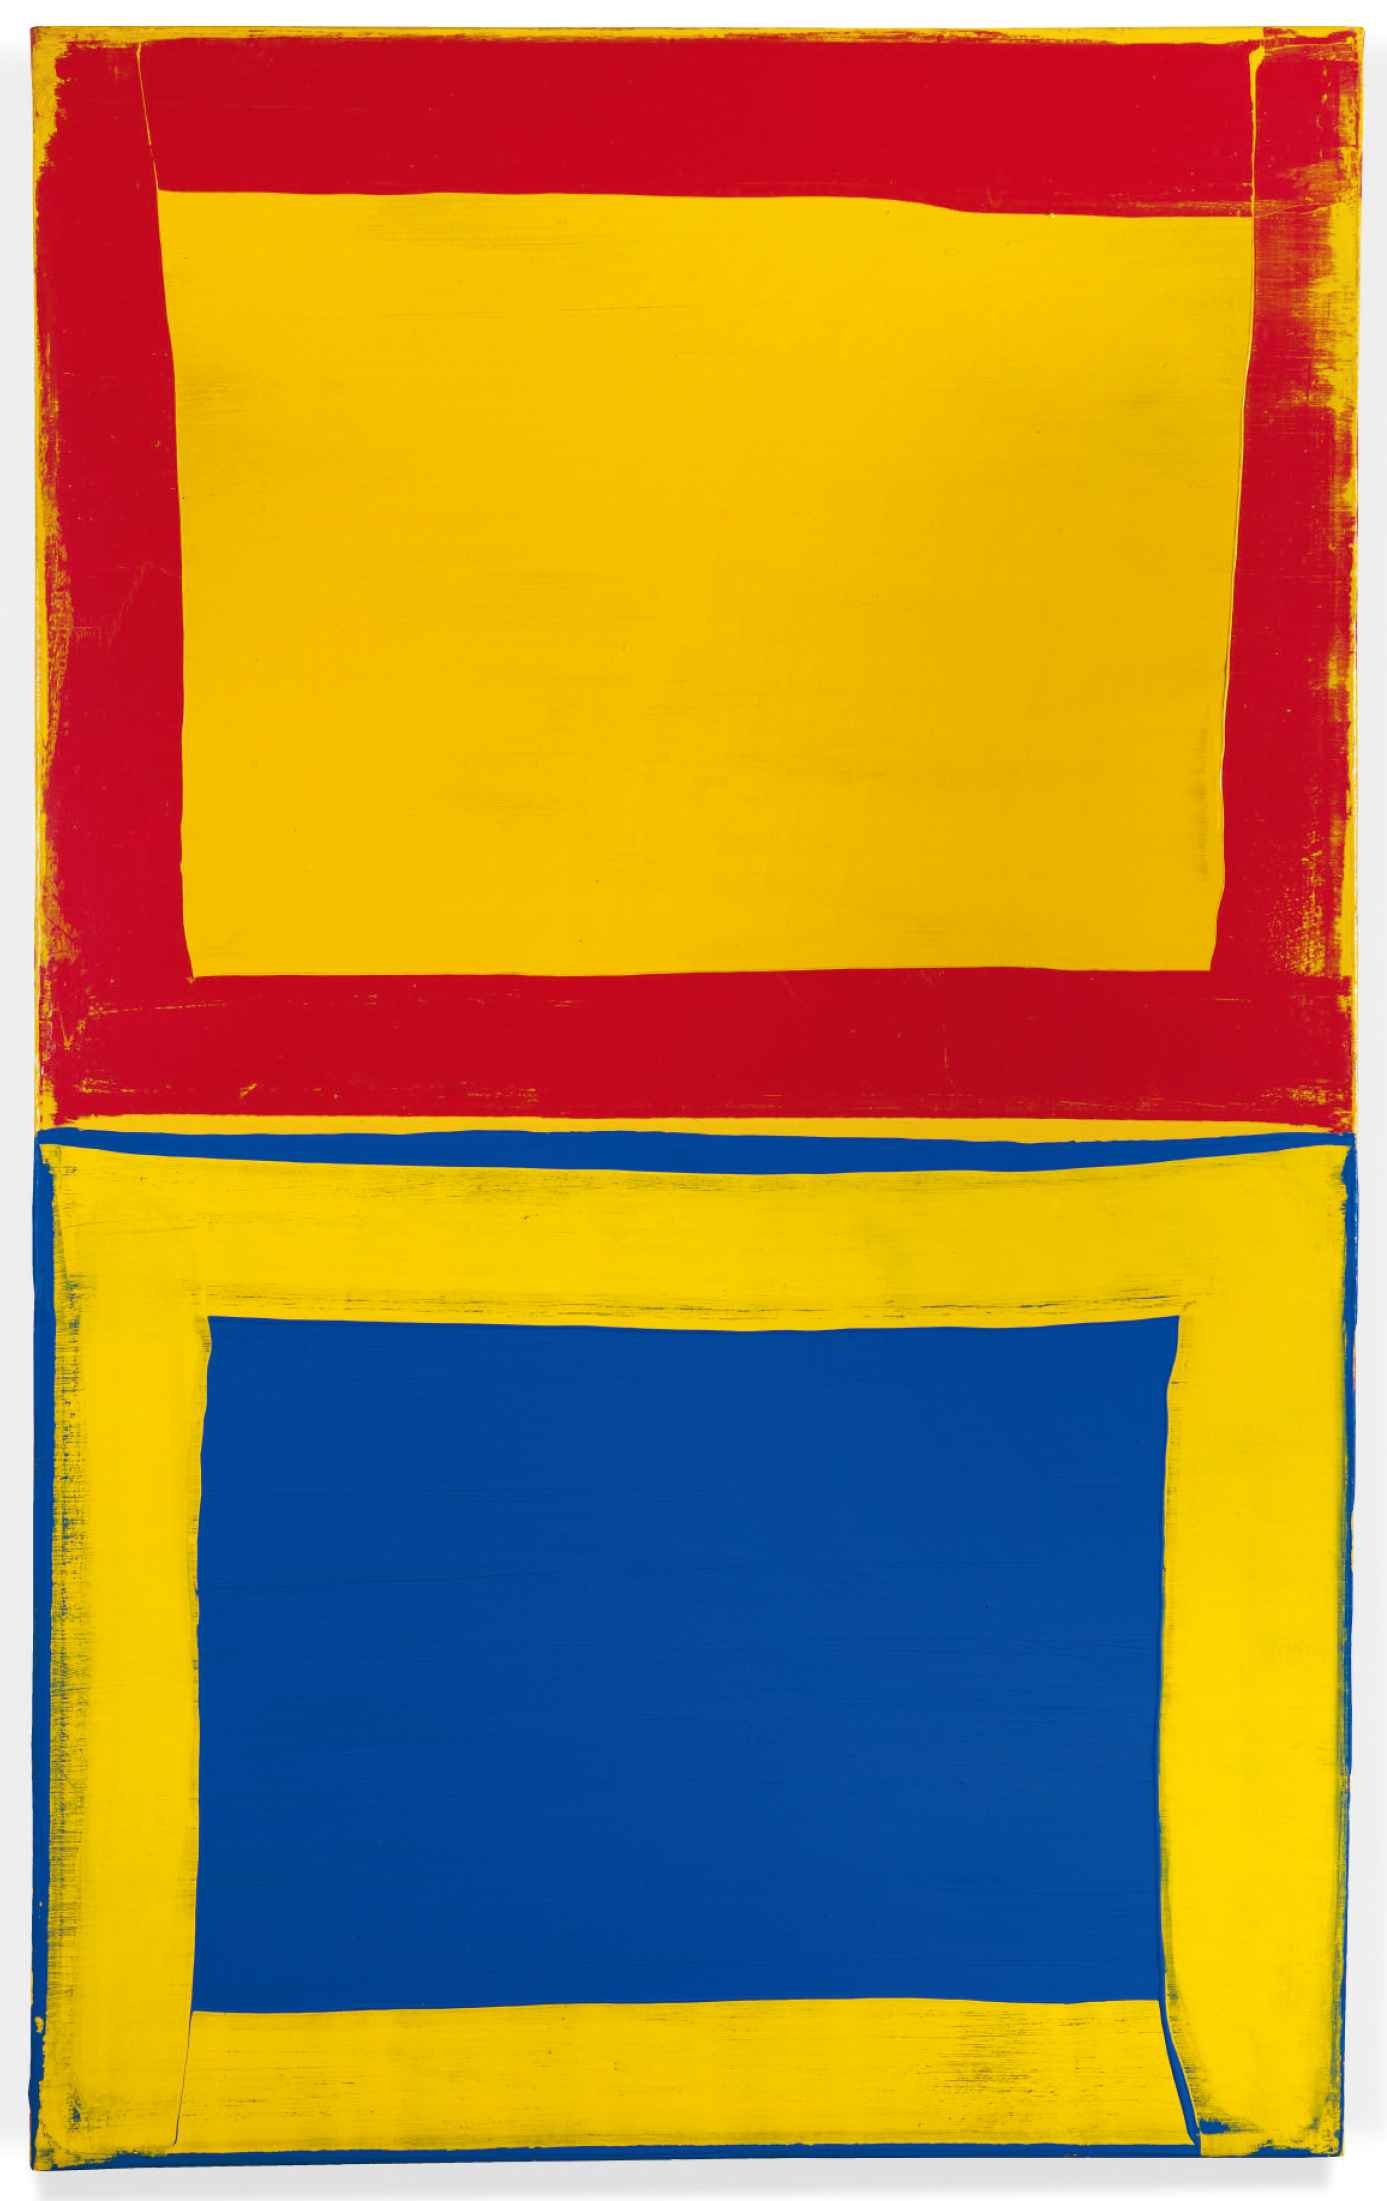 Mary Heilmann, The First Three for Two Red Yellow Blue, 1975, ©Mary Heilmann